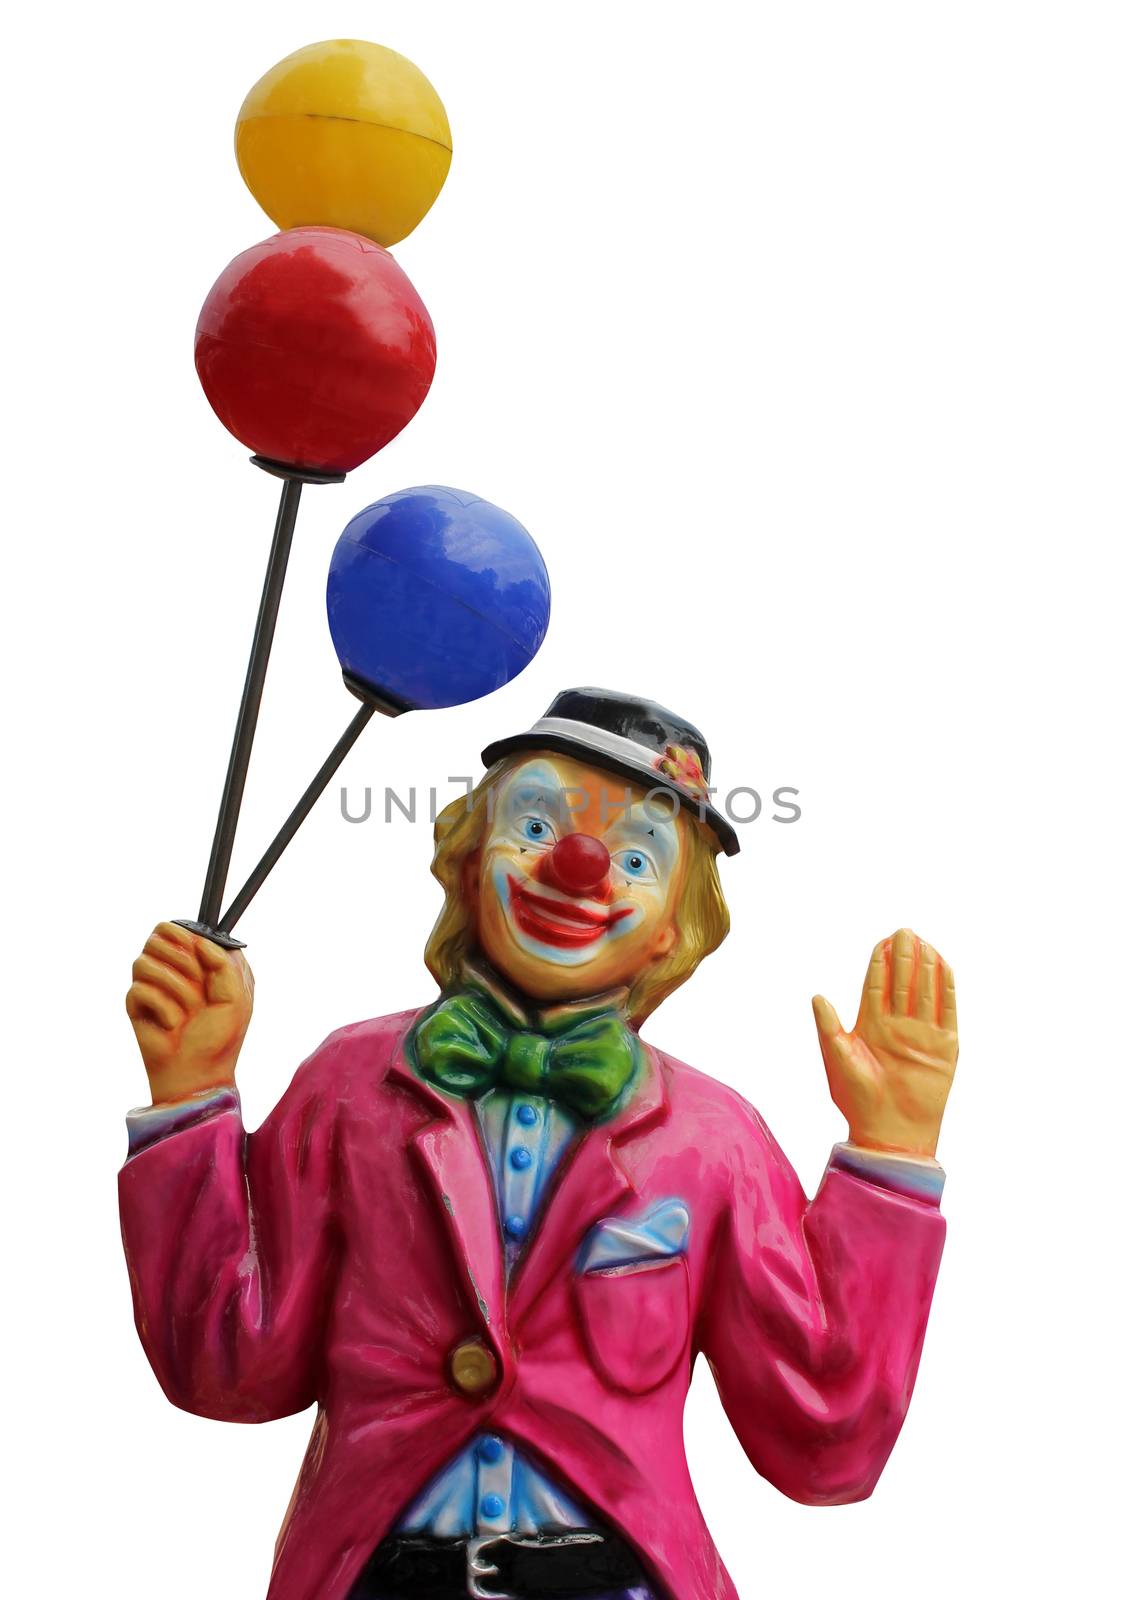 Model of circus clown with balloons isolated on a white background.